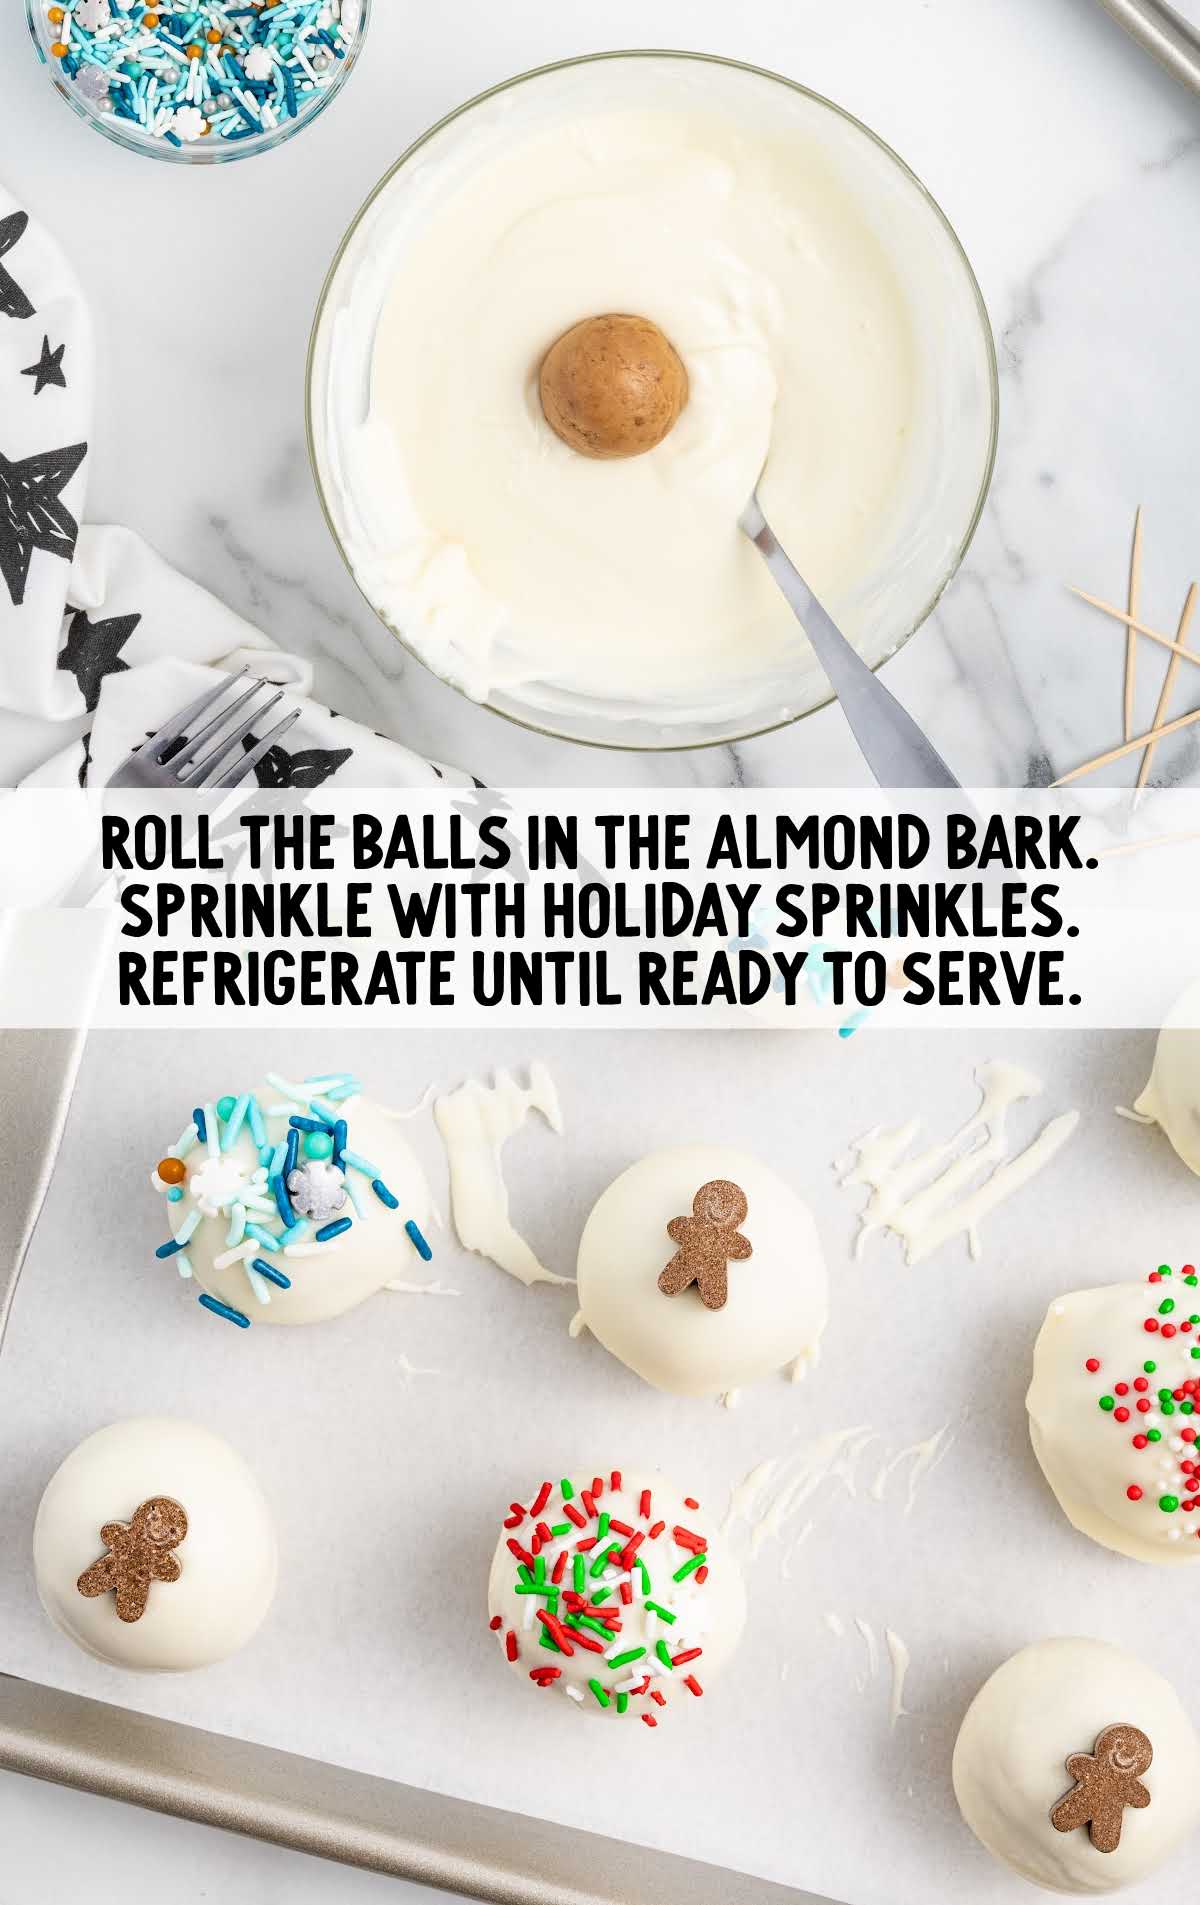 balls dipped into almond bard and sprinkled with holiday sprinkles